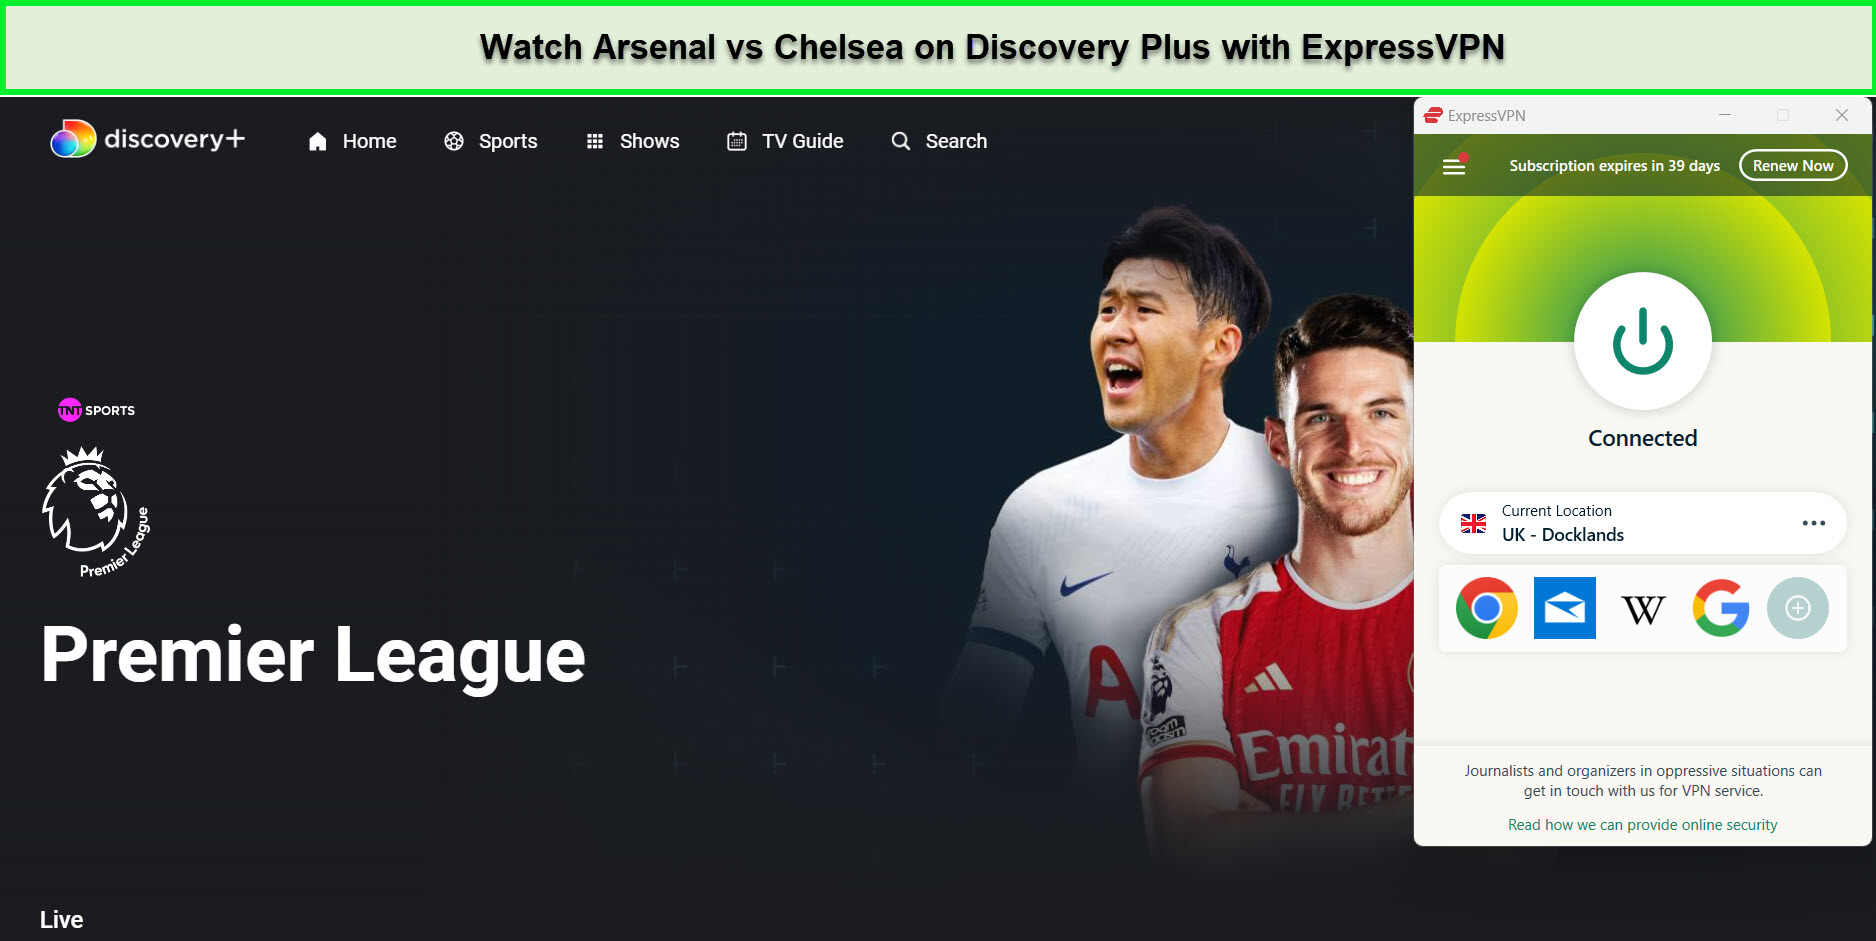 Watch-Arsenal-vs-Chelsea-in-Netherlands-on-Discovery-Plus-with-ExpressVPN